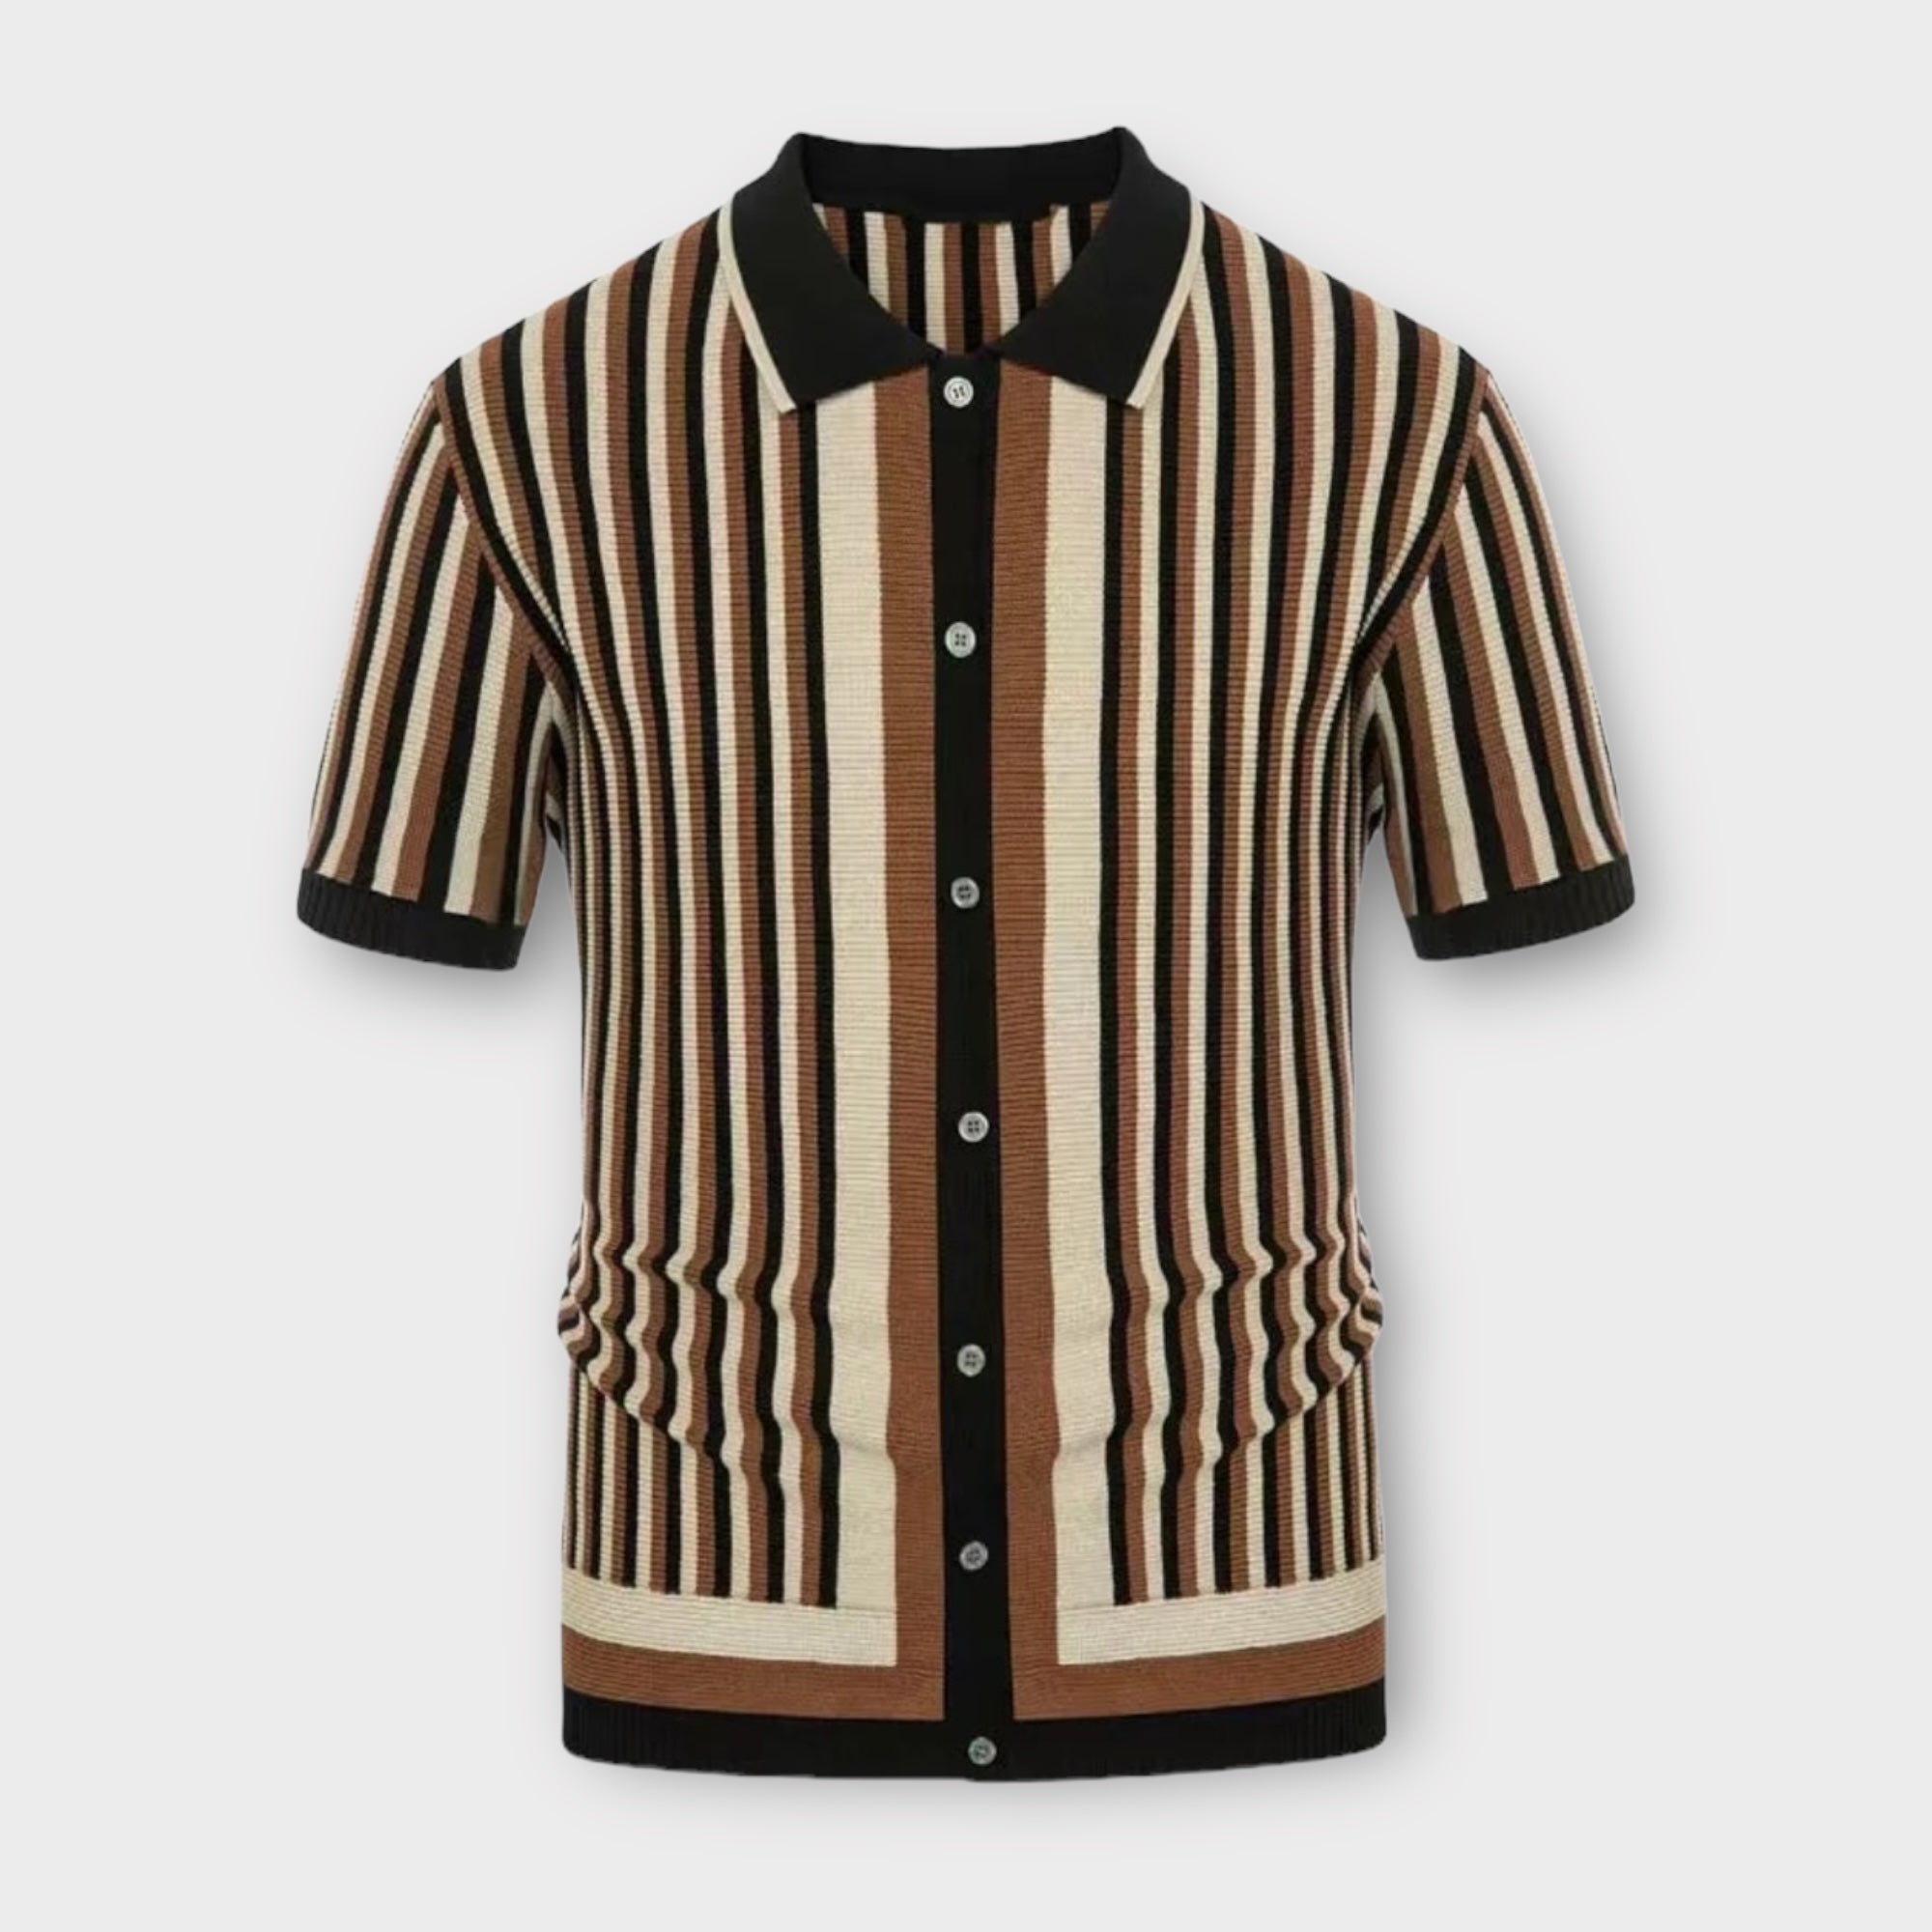 'AVUXZ' Striped knitted polo shirt for men